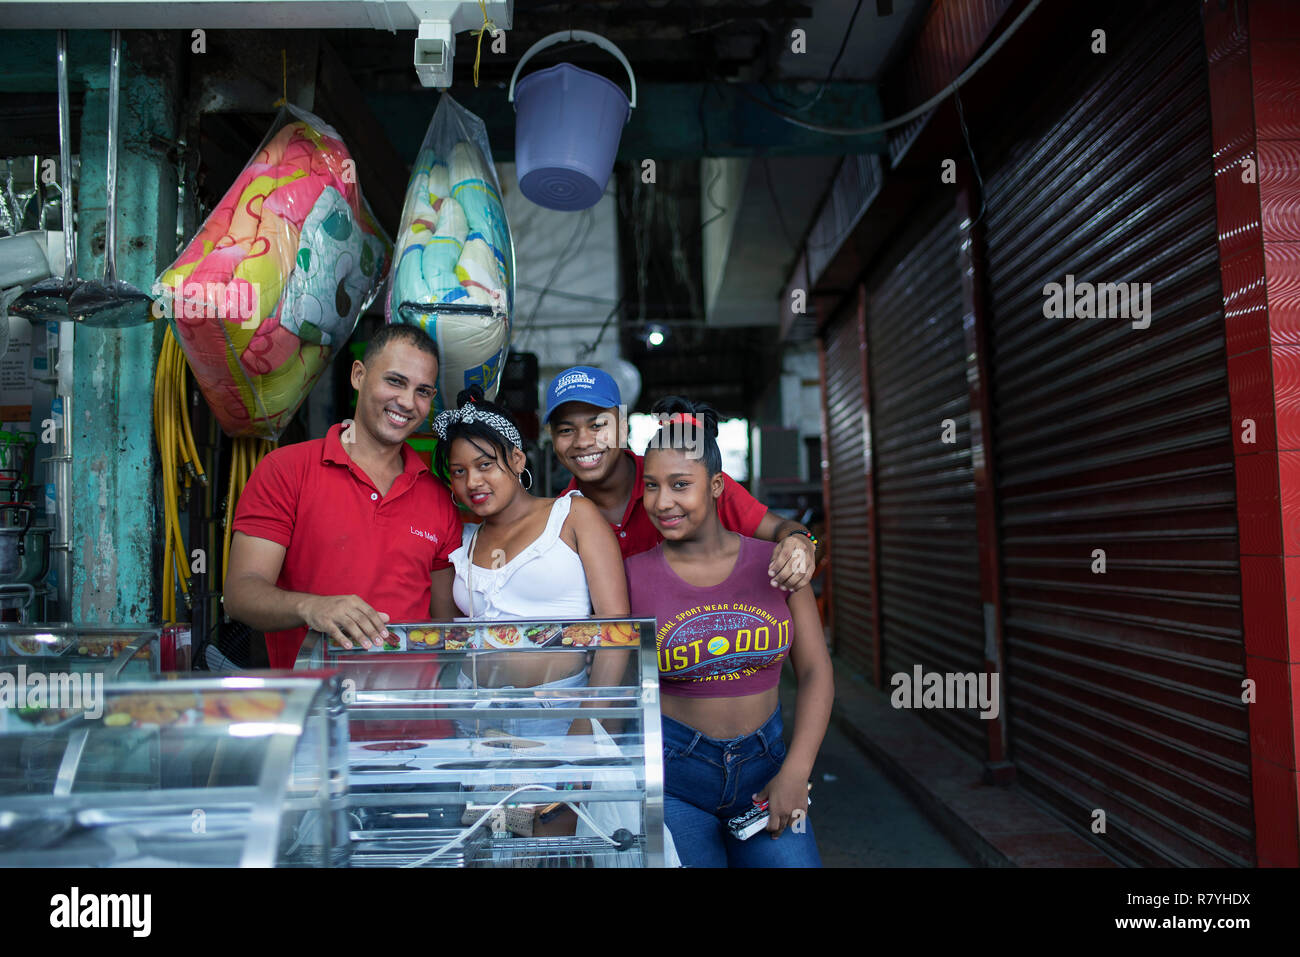 Group photo of smiling, young Colombian people at Bazurto market (Mercado Bazurto) outside a homeware shop. Cartagena de Indias, Colombia. Oct 2018 Stock Photo